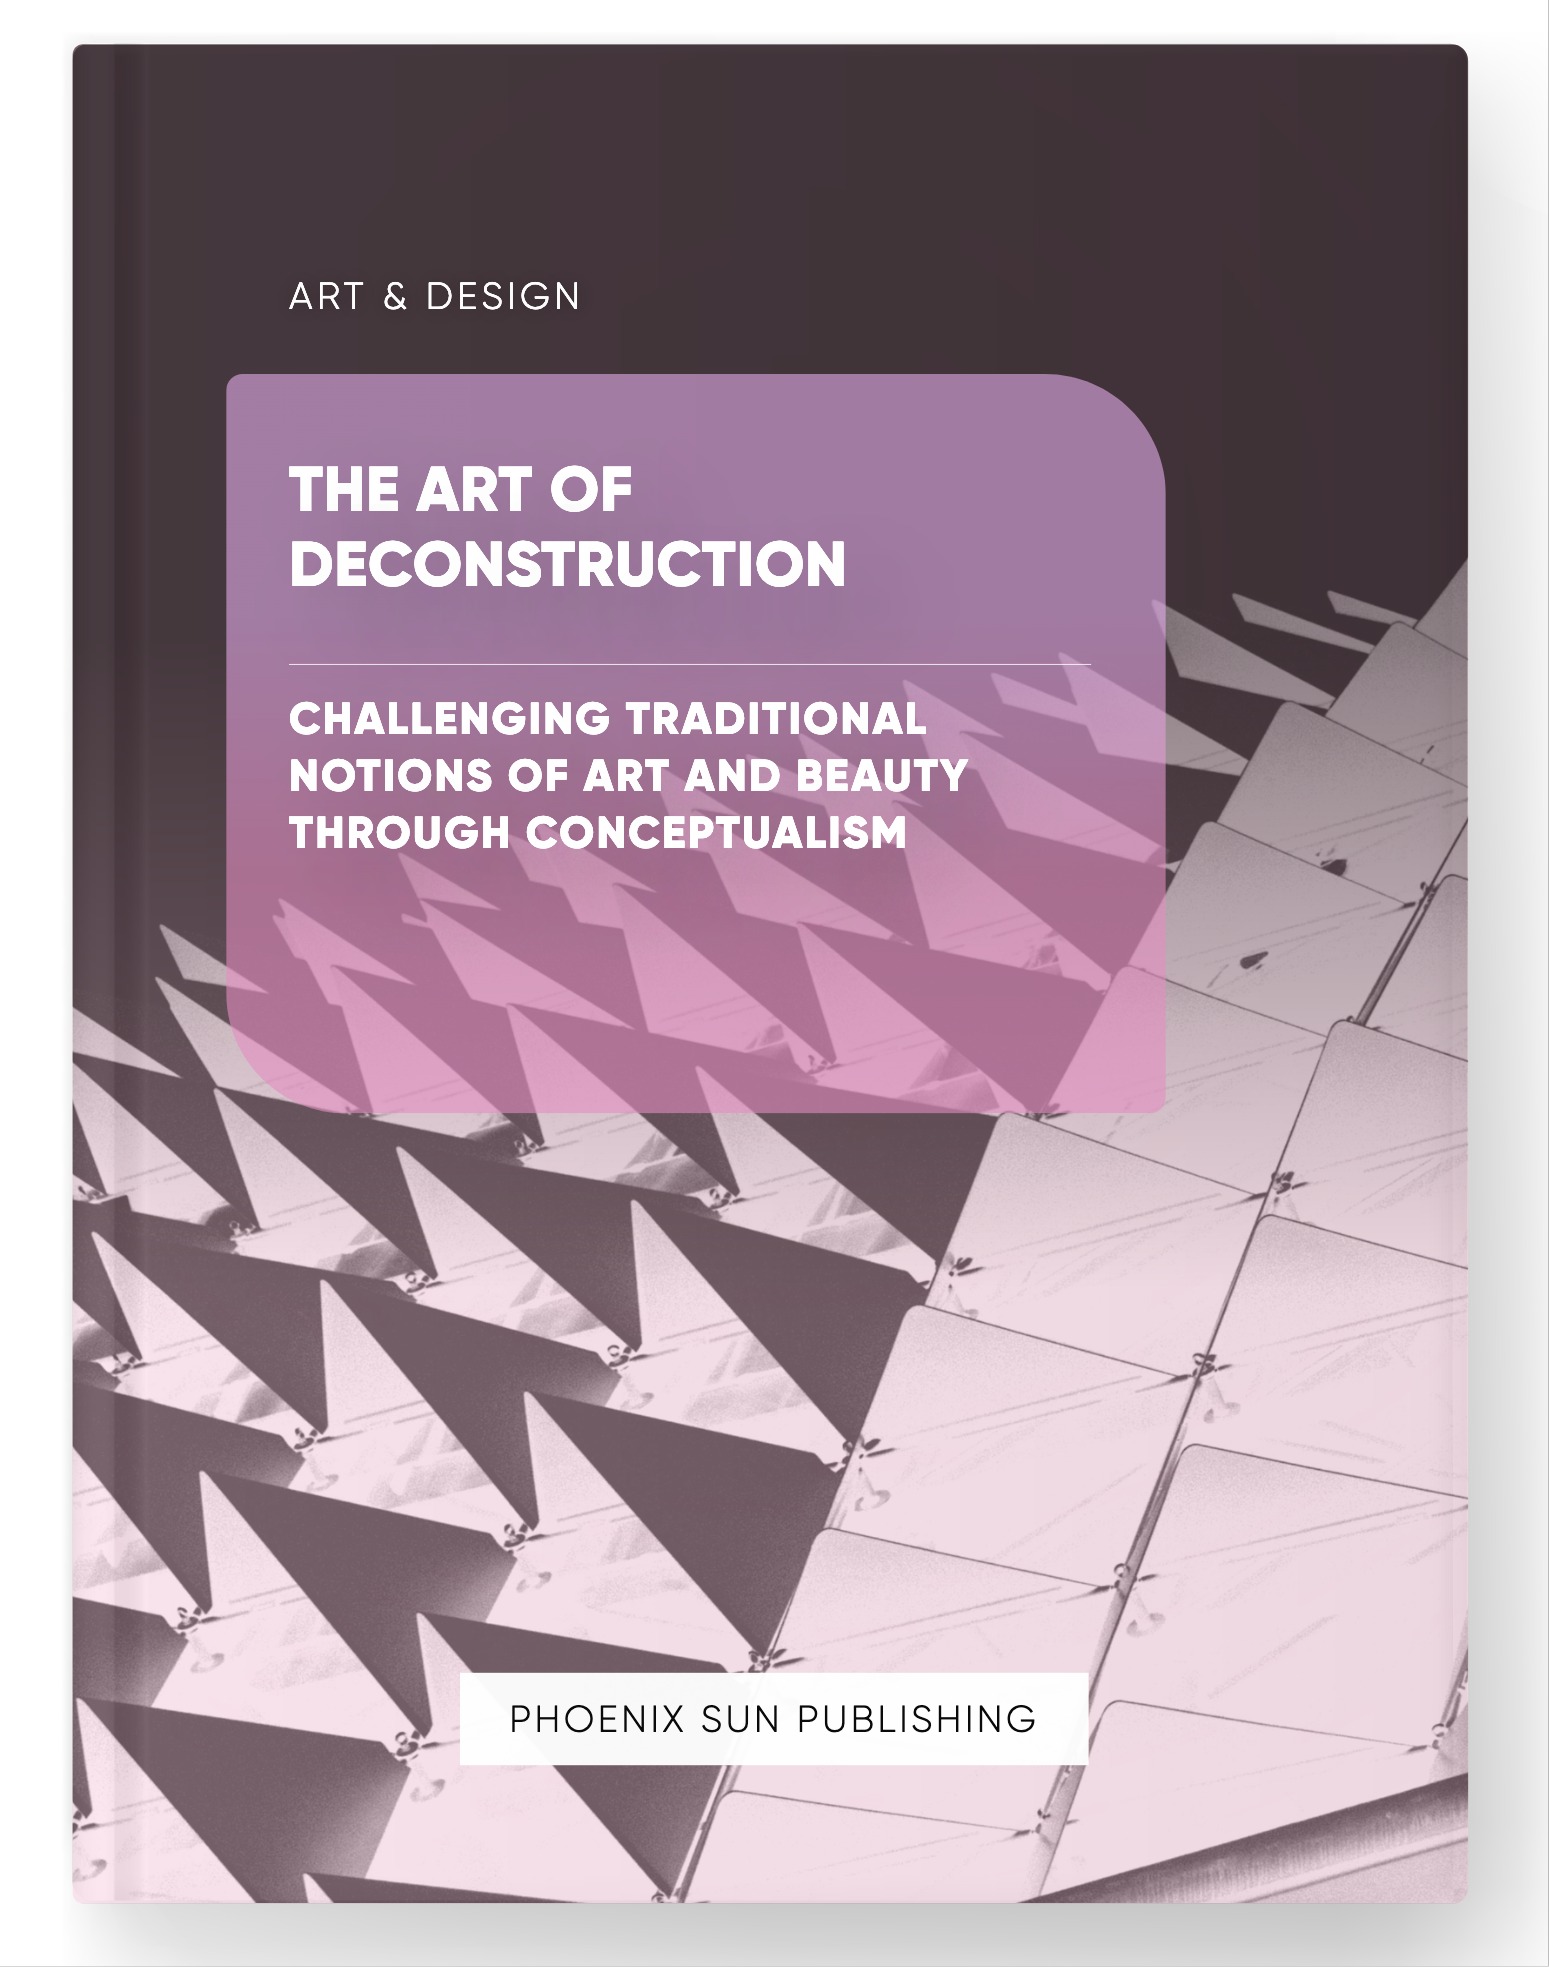 The Art of Deconstruction – Challenging Traditional Notions of Art and Beauty through Conceptualism